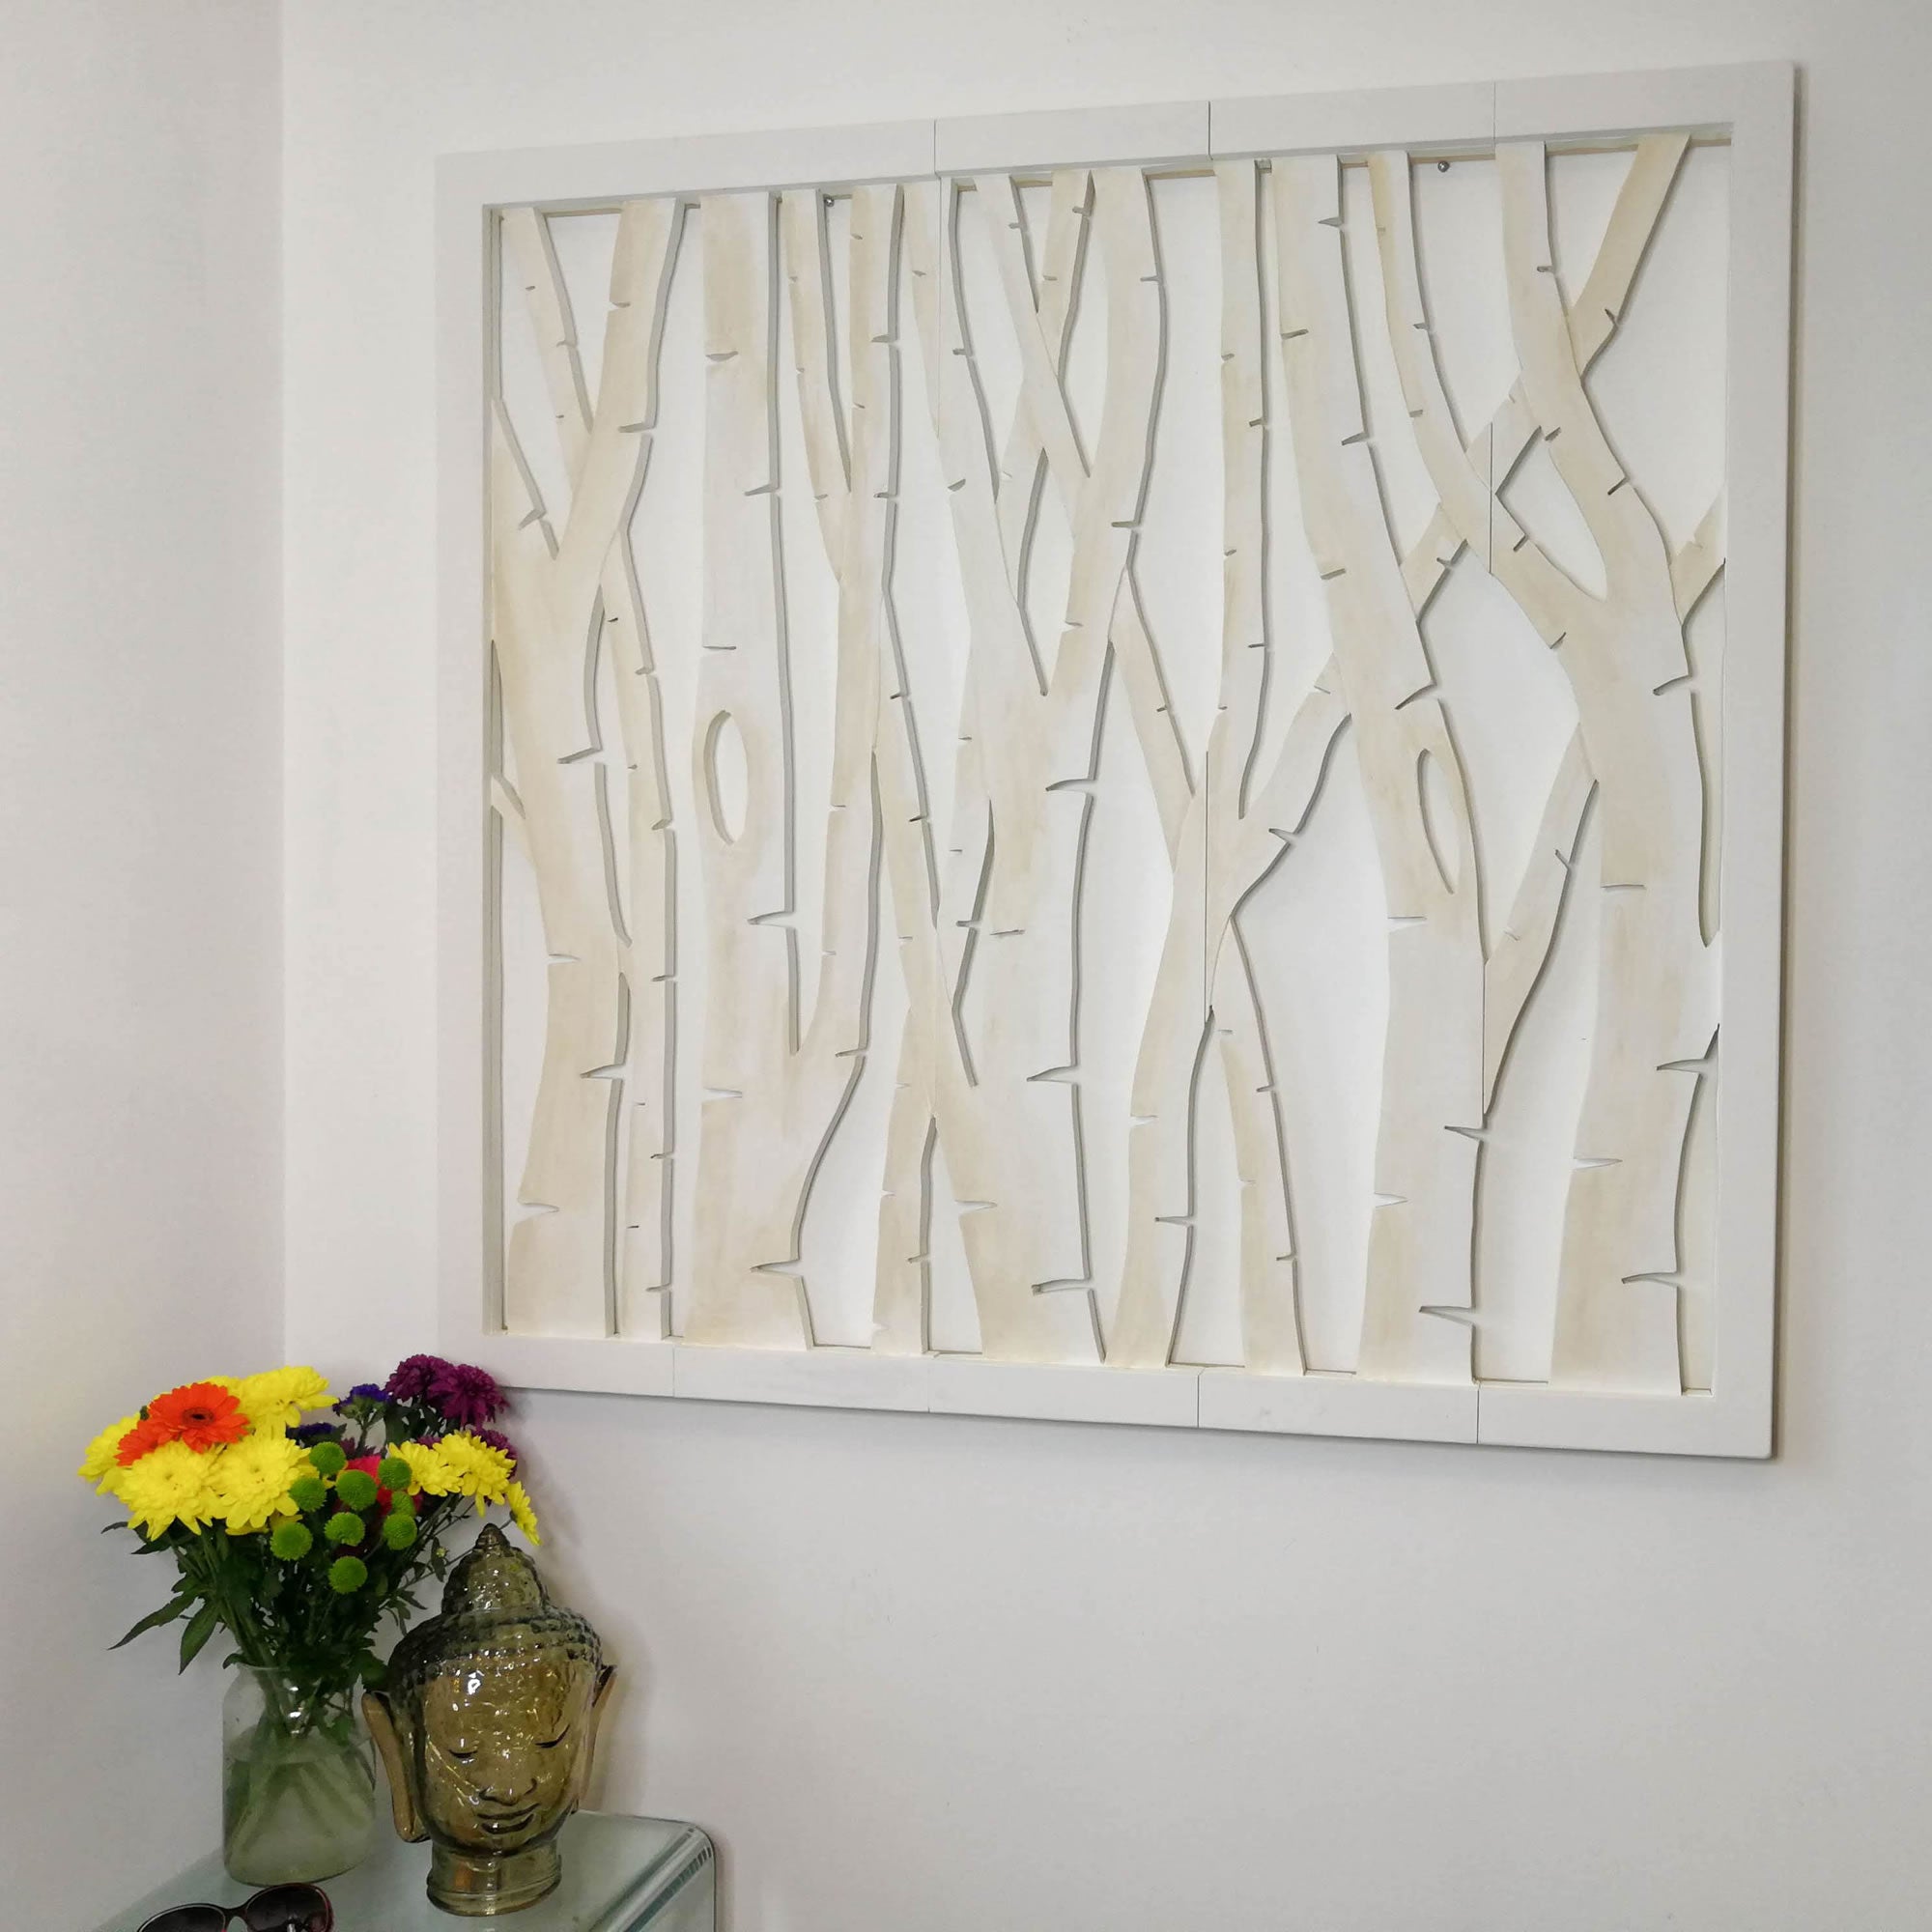 Carved Wooden Wall Art - Large Decorative Birch Trees Headboard